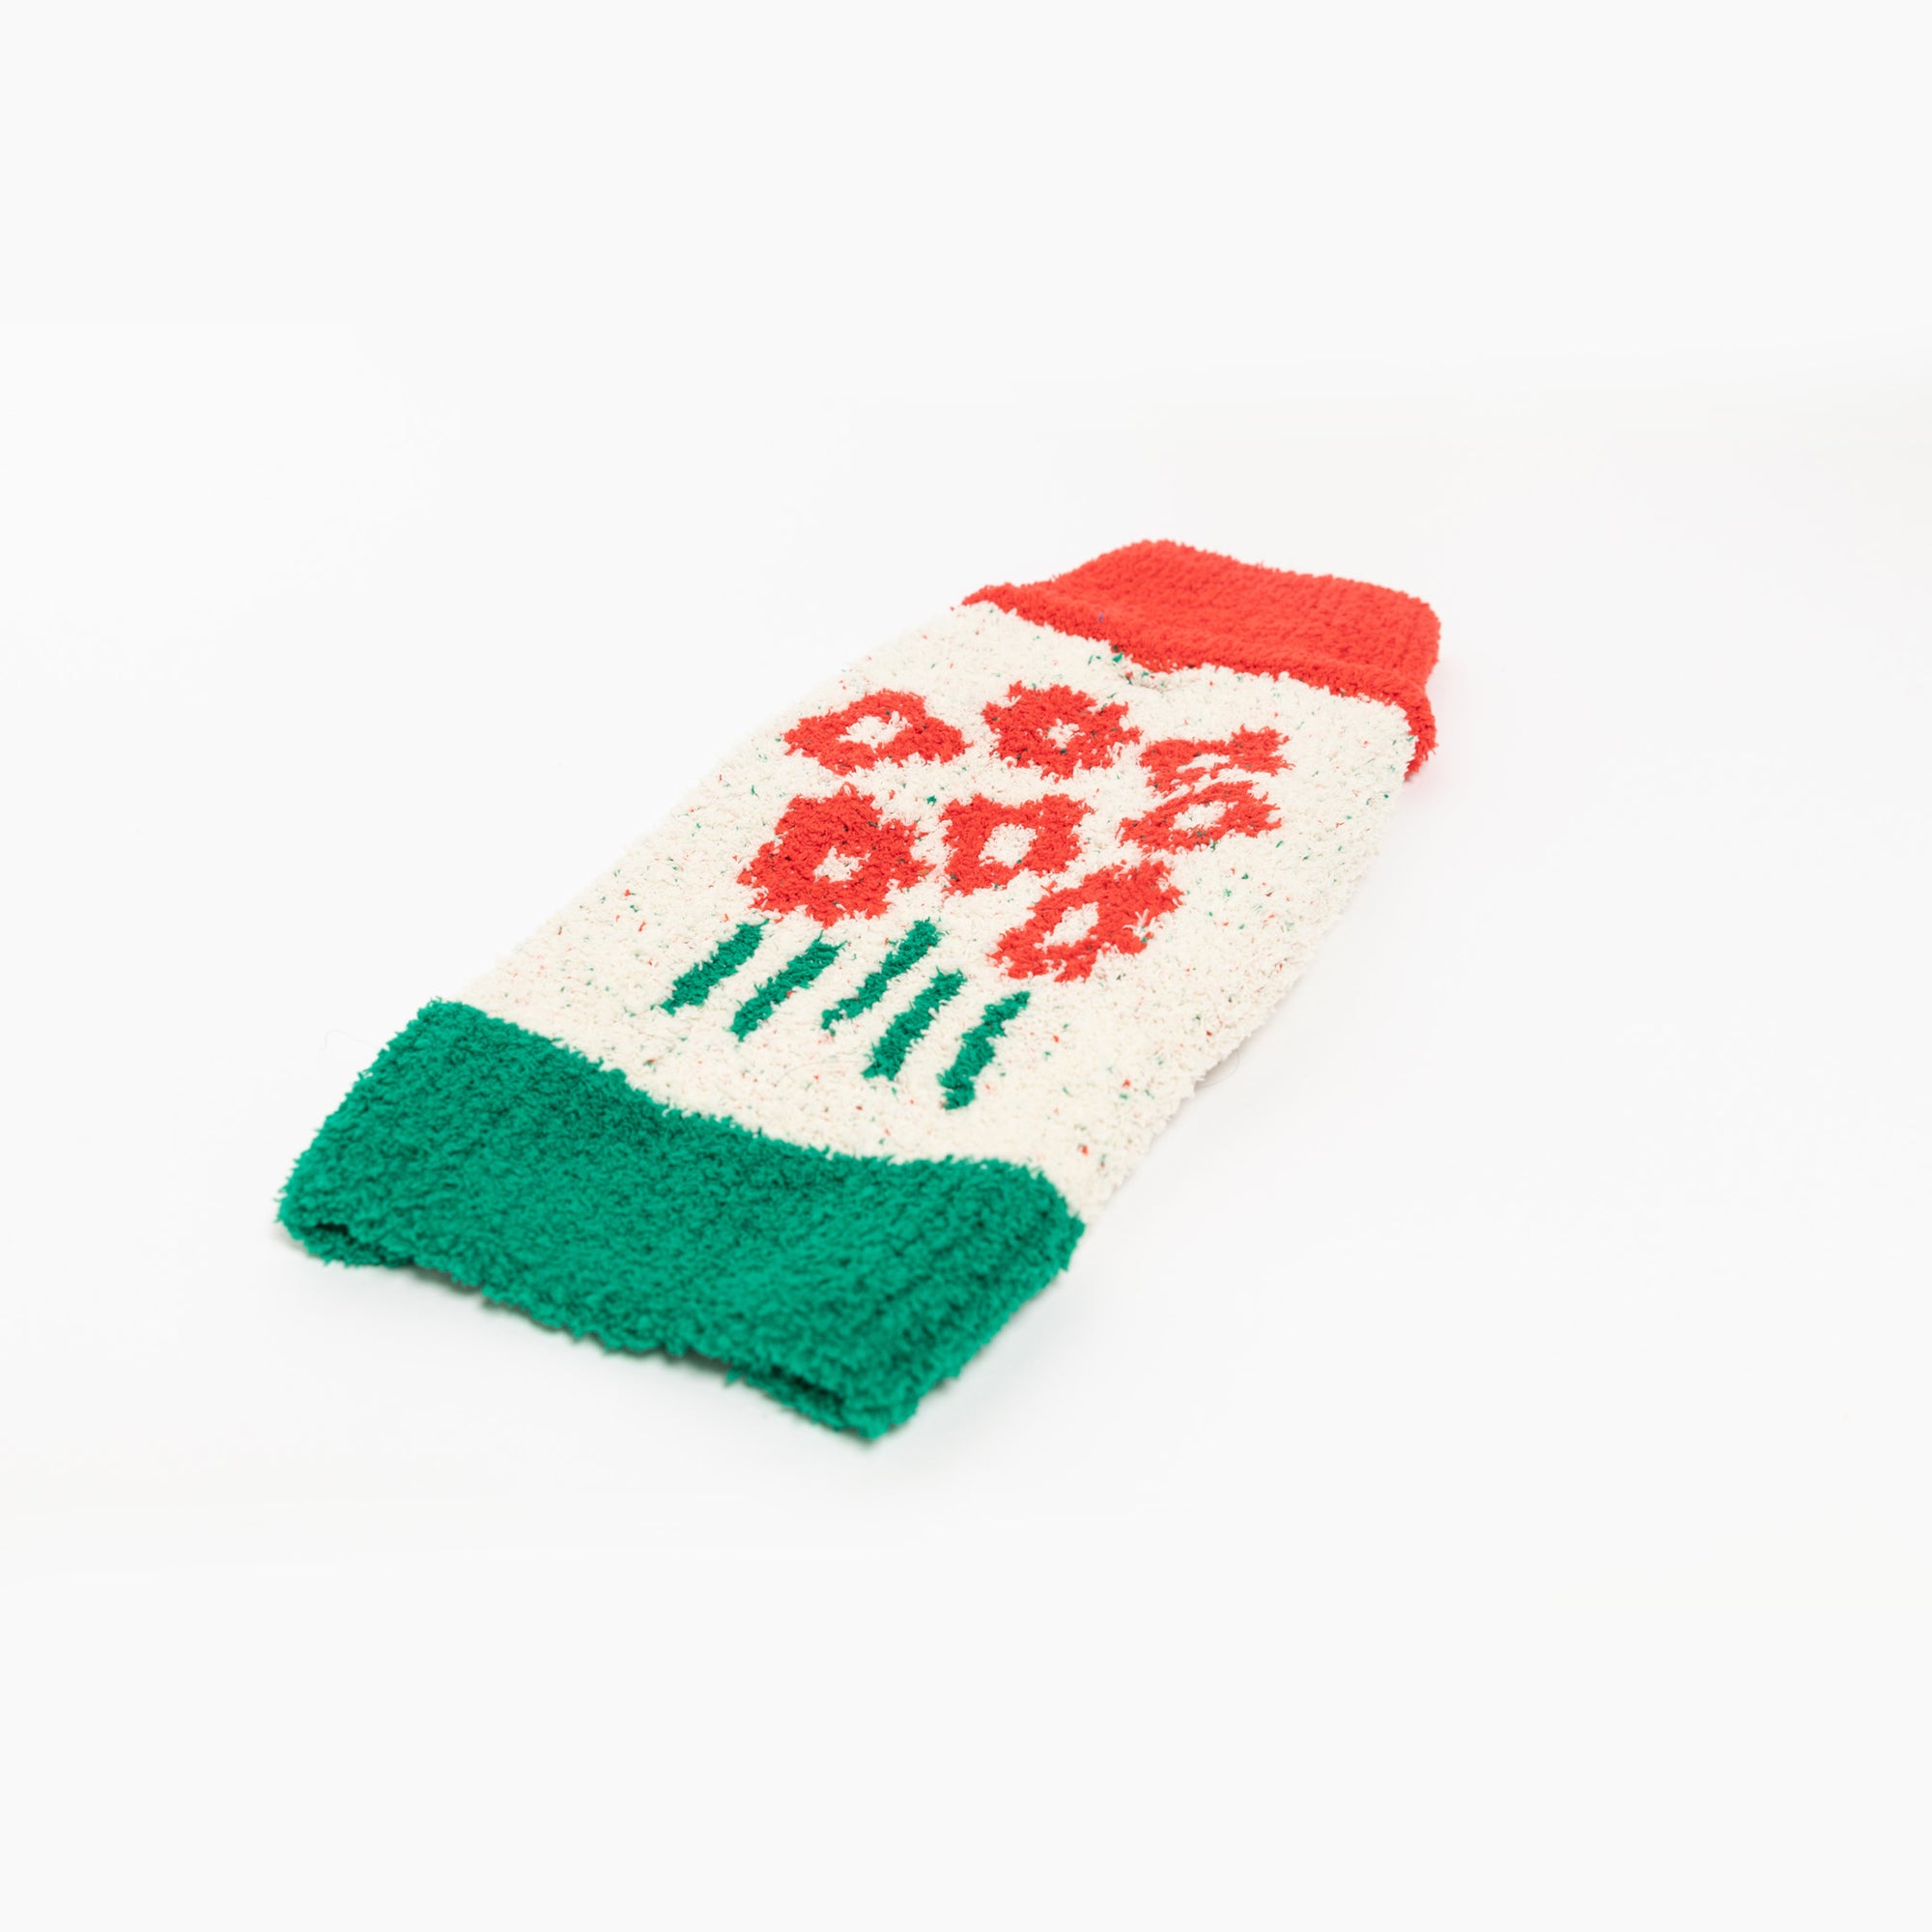  "The Furryfolks" sweater with a flower pattern in red and green, laid out on a white surface.